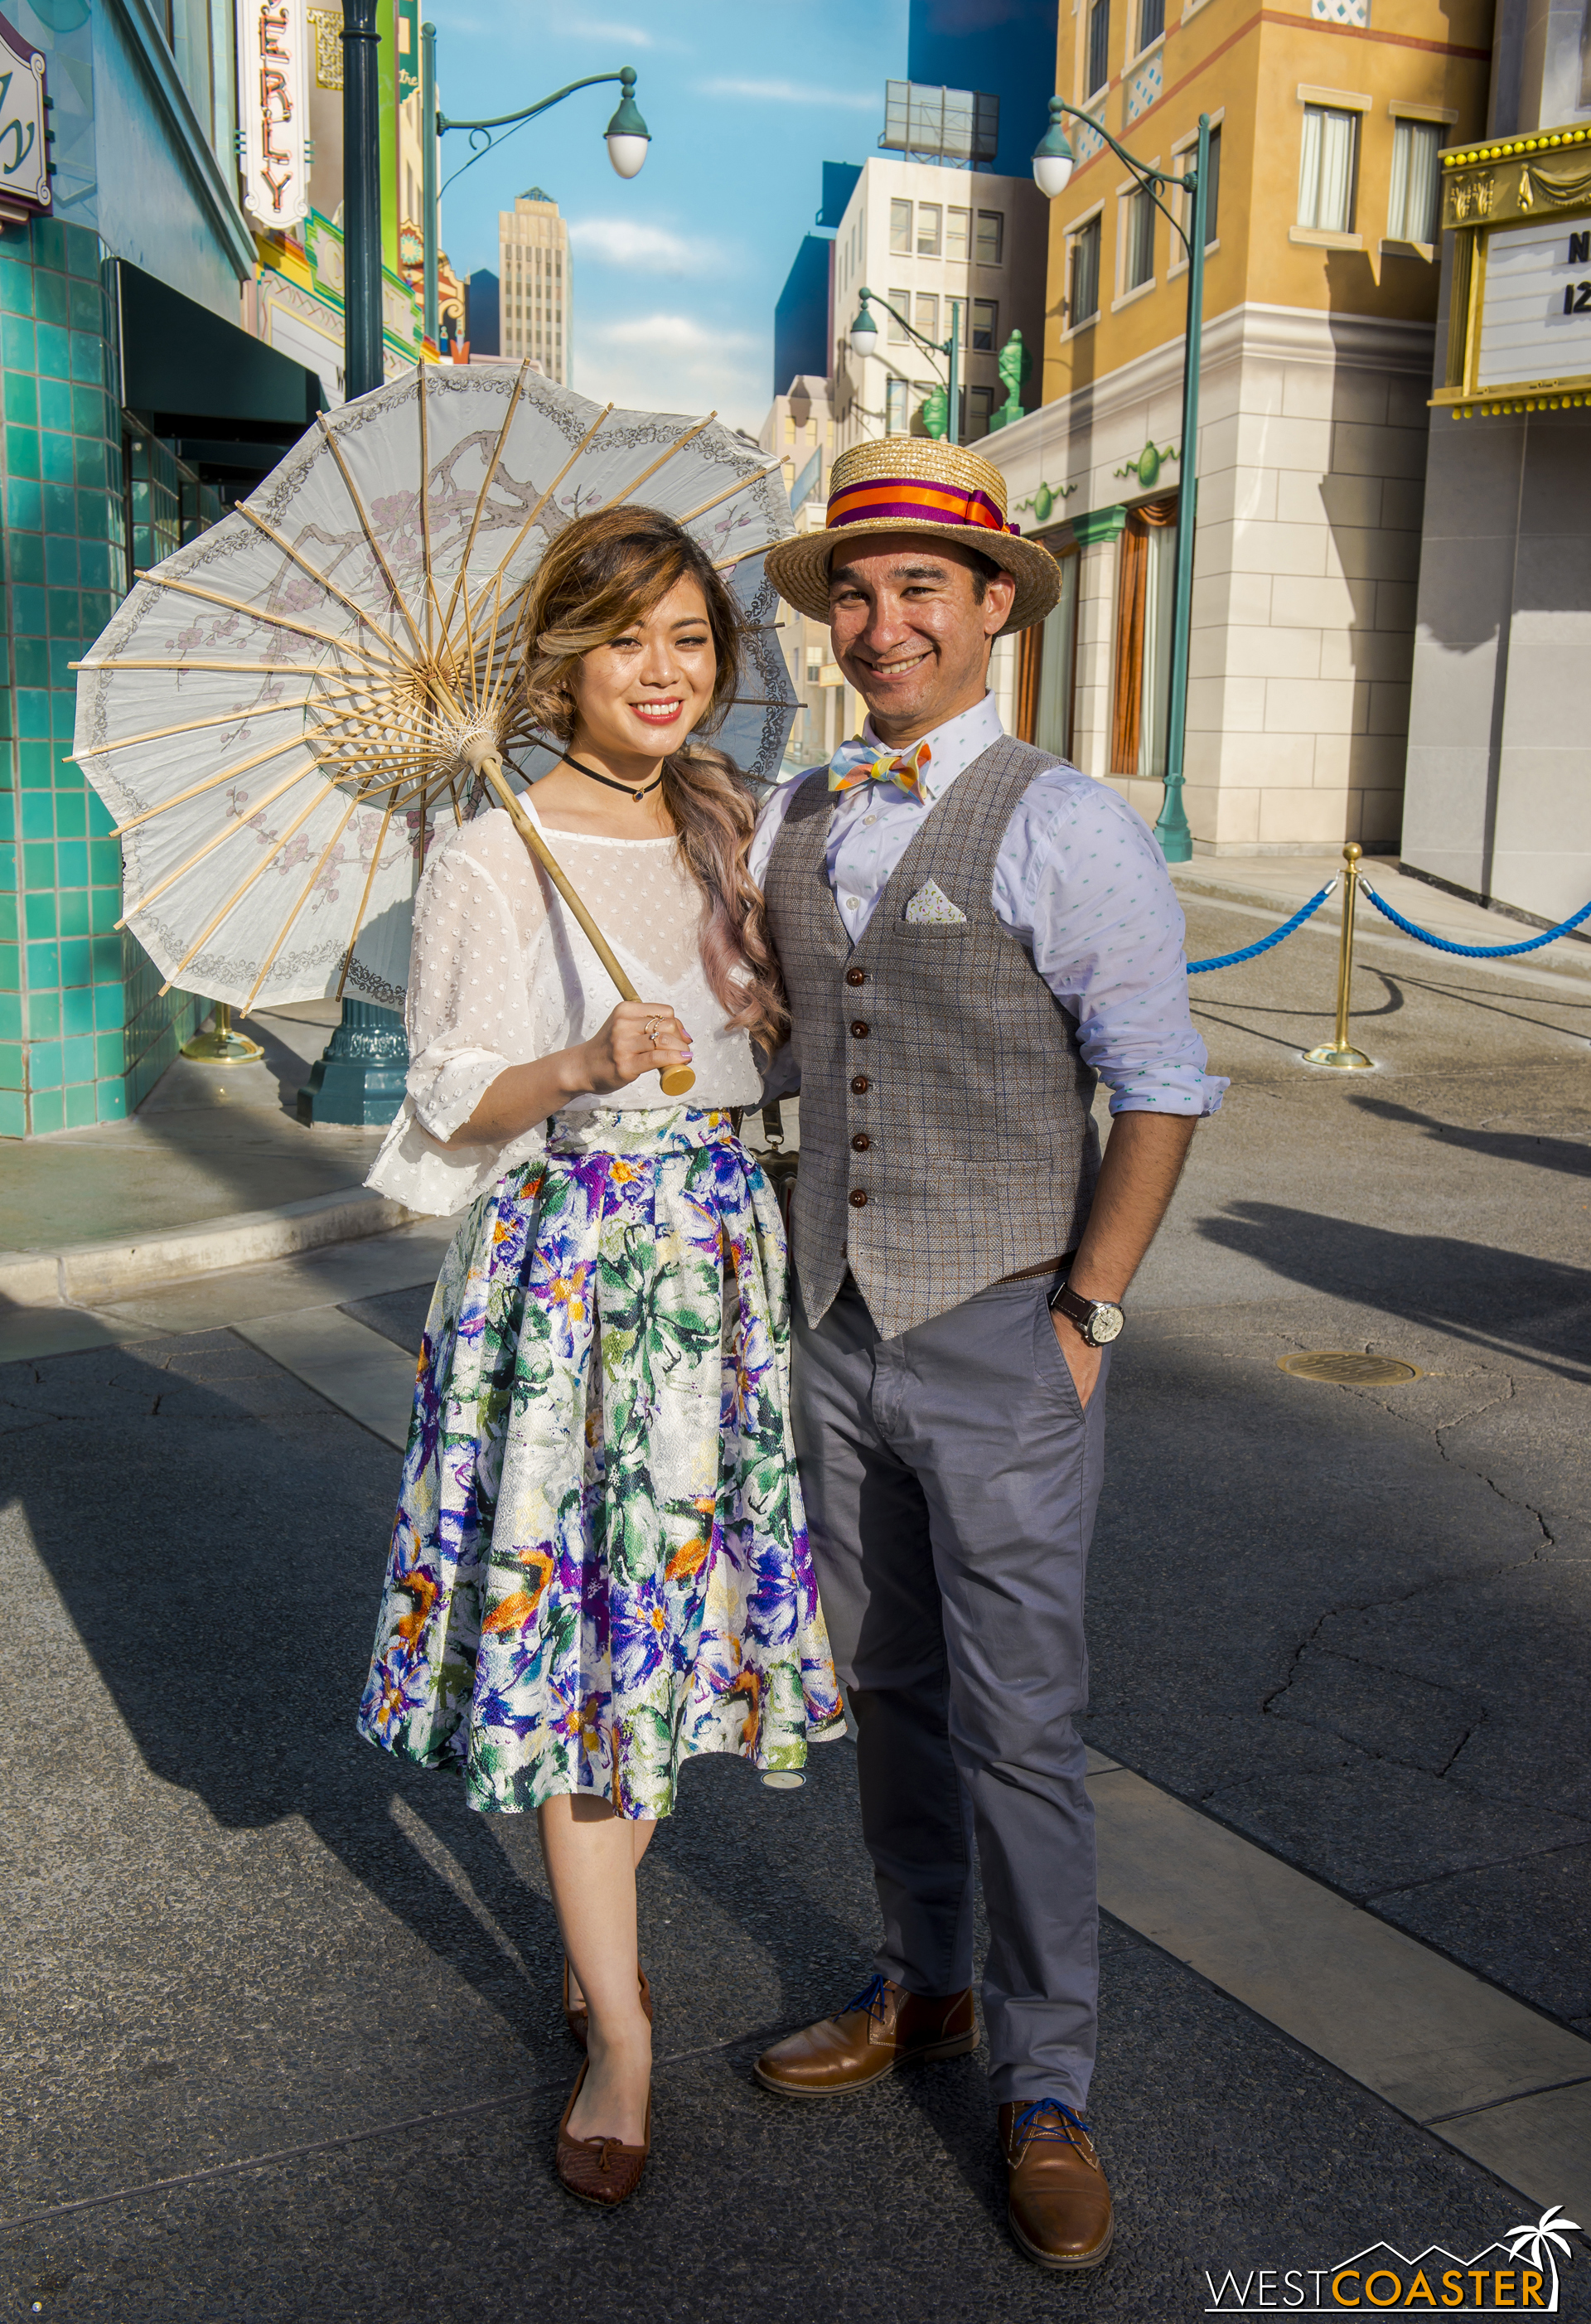  Dapper Day attracts enough people that one can run into familiar faces from past Dapper Days, as I did with this couple. 